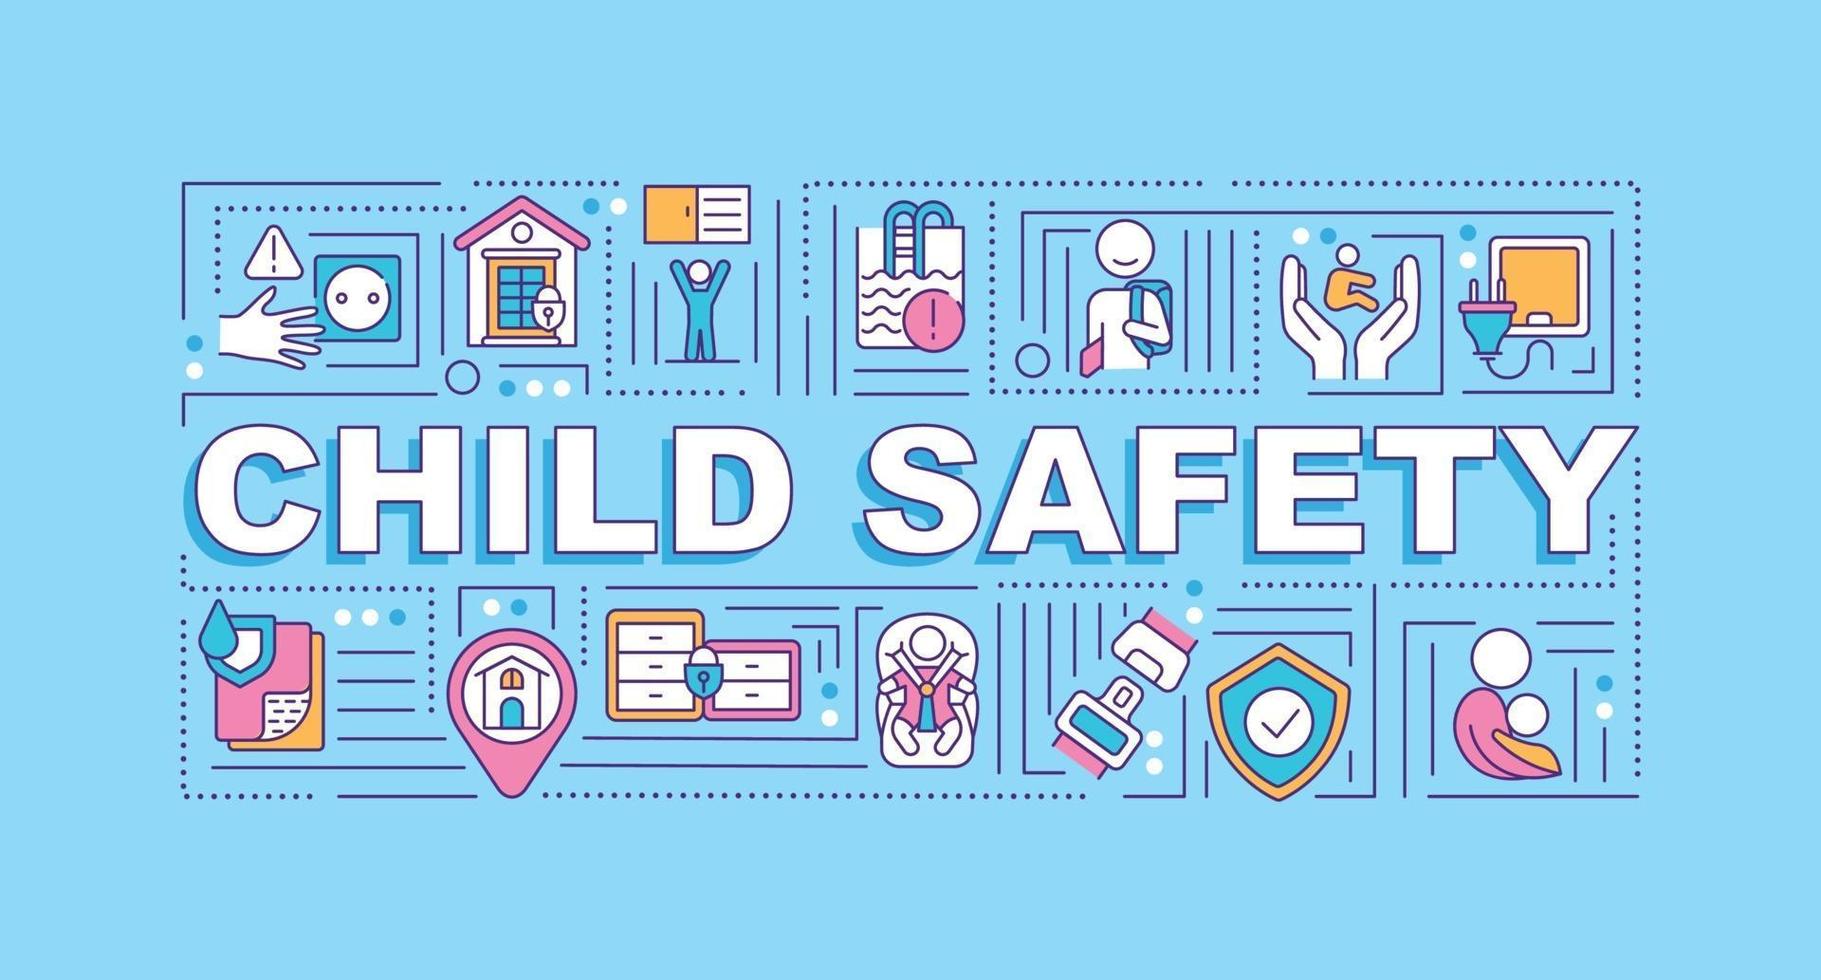 Child safety word concepts banner vector